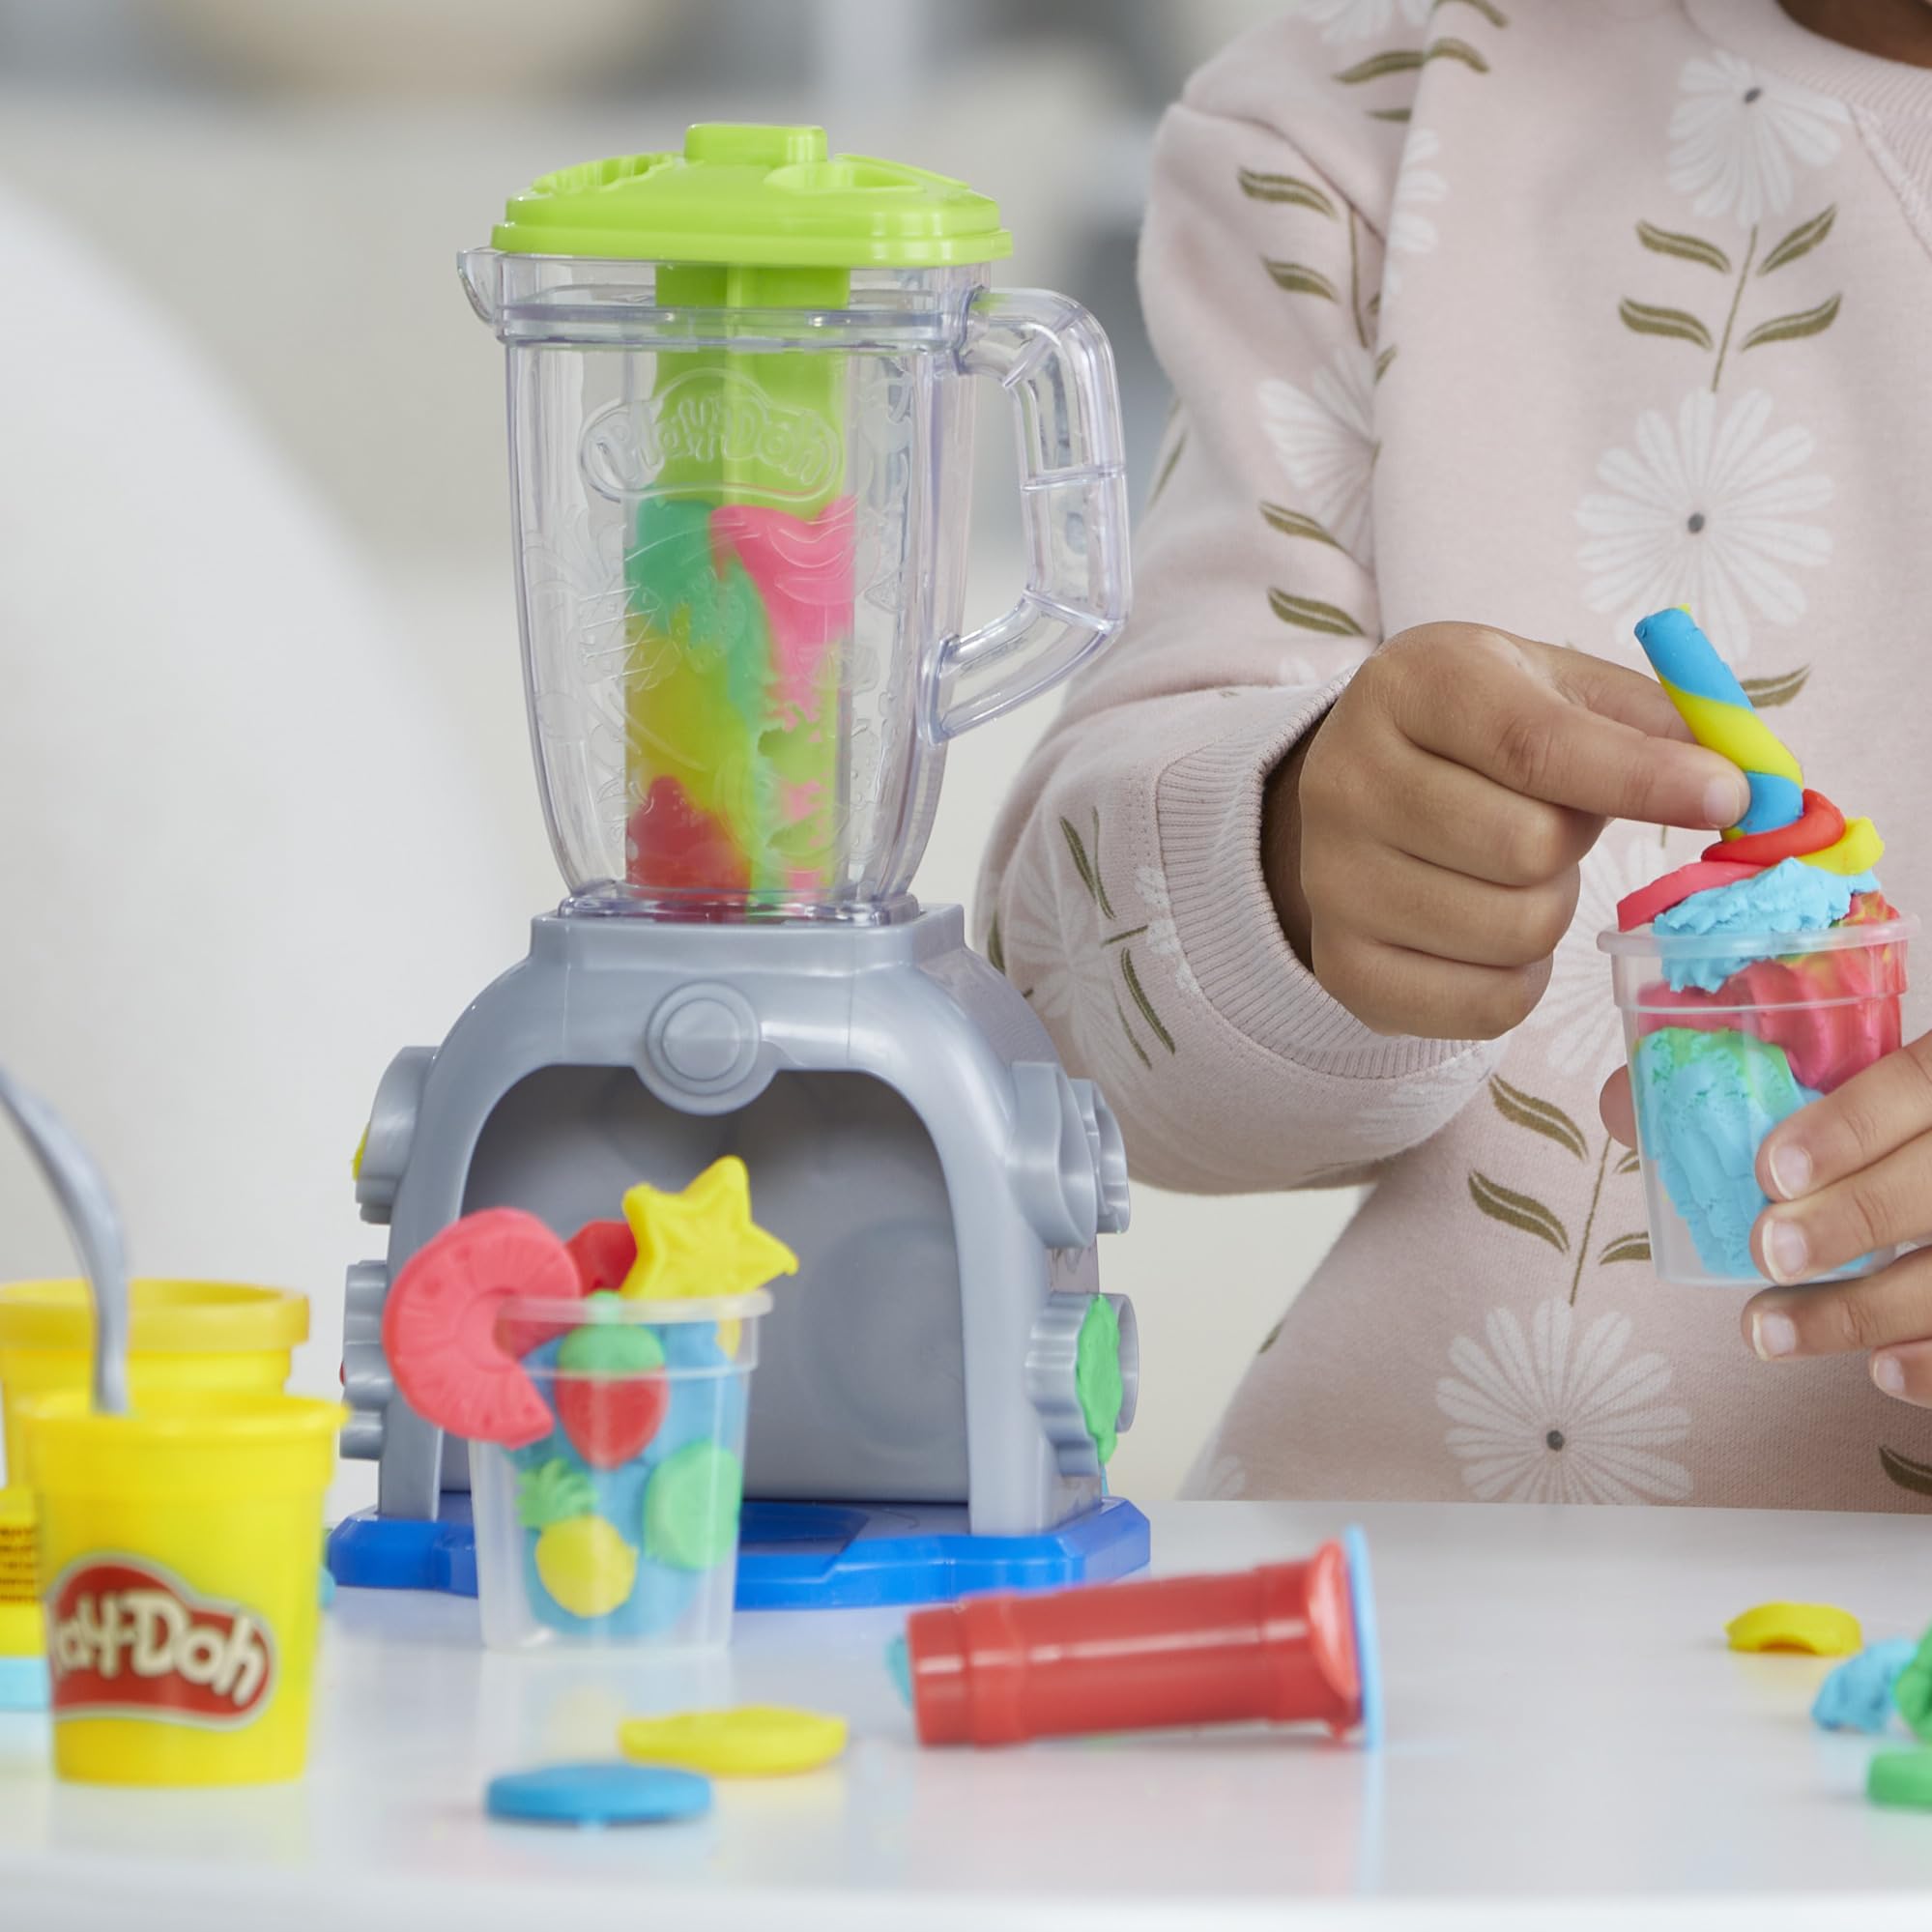 Play-Doh Swirlin' Smoothies Toy Blender Playset, Play Kitchen Appliances, Kids Arts and Crafts Toys for 3 Year Old Girls and Boys and Up